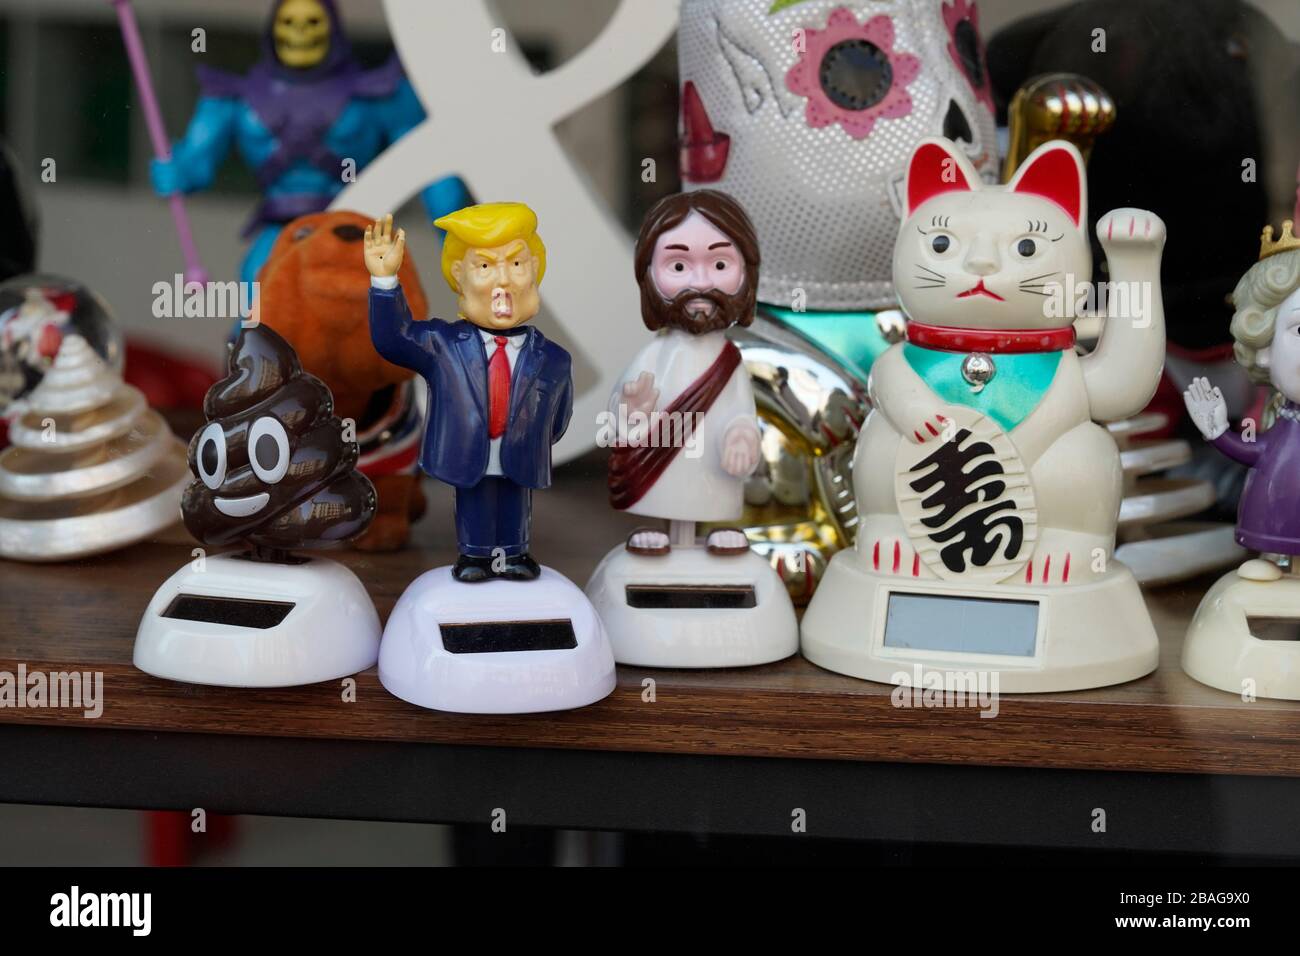 Pile of poo, Trump, Jesus and the Fortune Cat Stock Photo